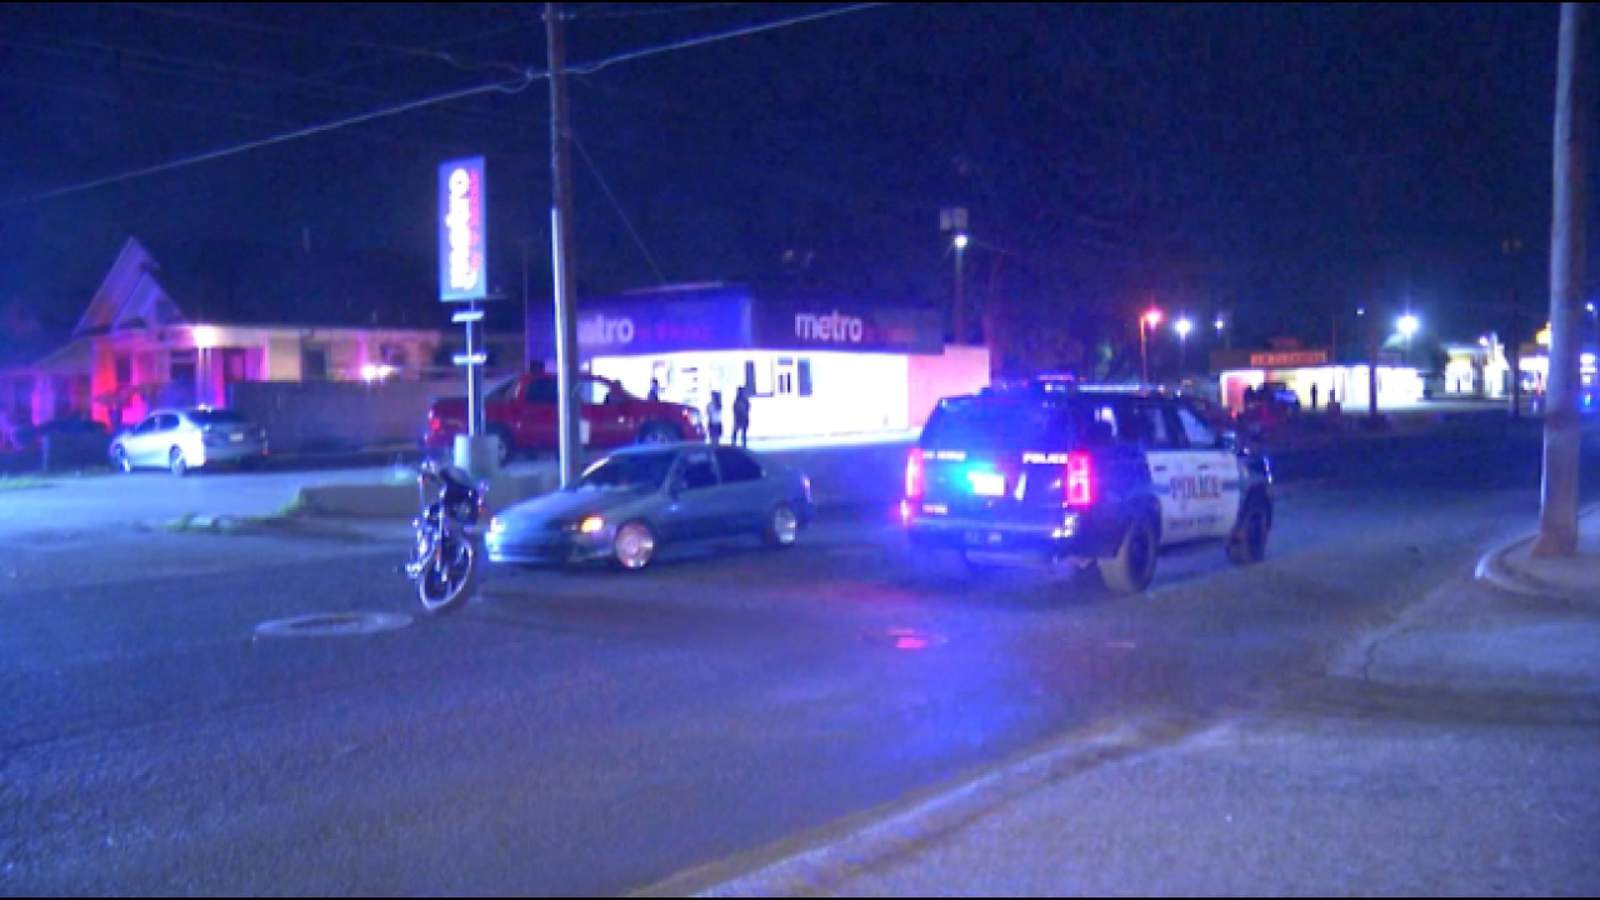 Motorcyclist hospitalized after being hit by car at West Side intersection, police say